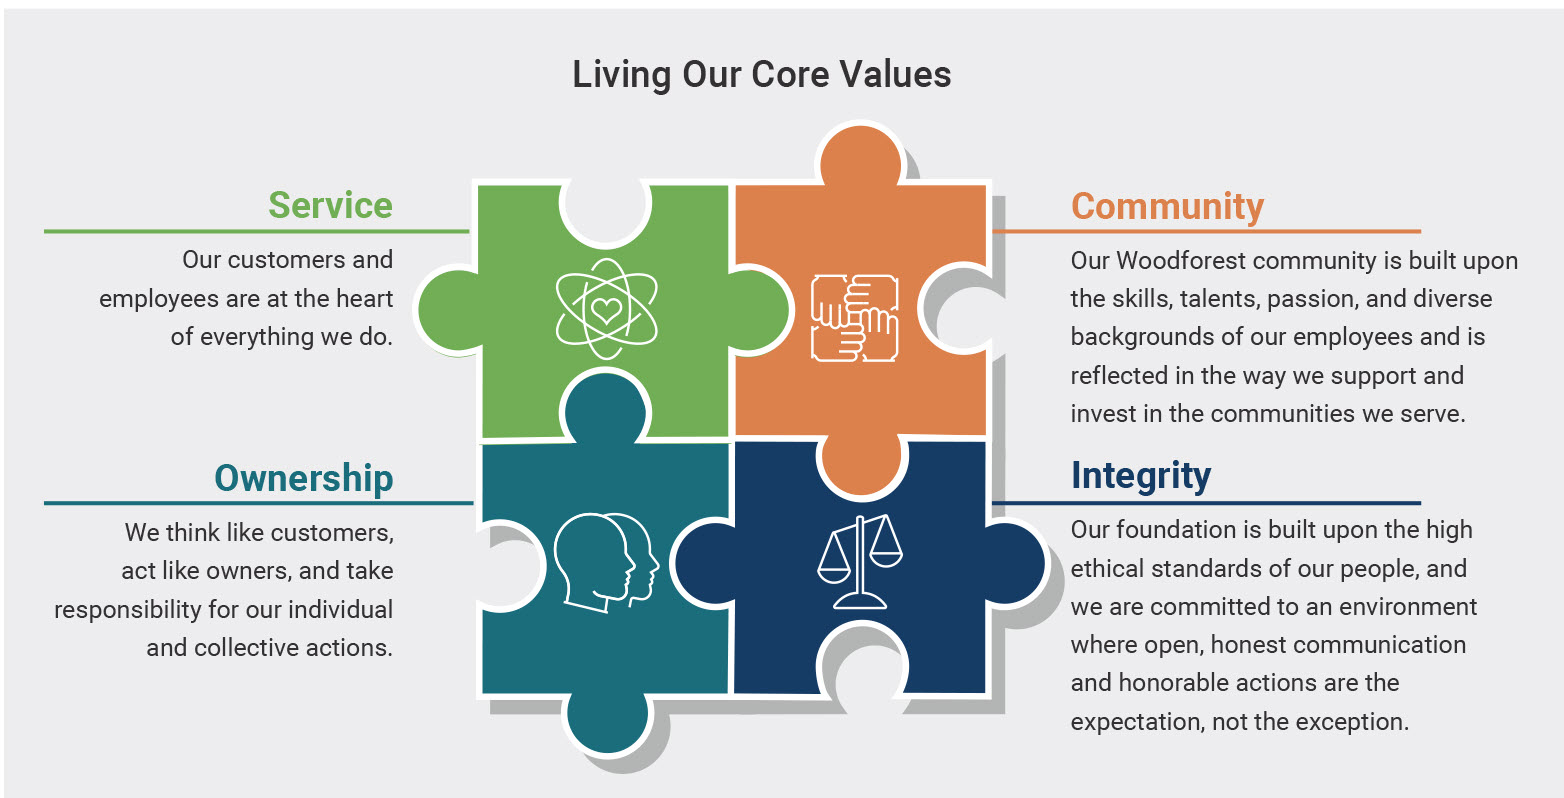 Living Our Core Values. Services: Our customers and employees are at the heart of everything we do. Community: Our Woodforest community is built upon the skills, talents, passion, and diverse backgrounds of our employees and is reflected in the way we support and invest in the communities we serve. Ownership: We think like customers, act like owners, and take responsibility for our individual and collective actions. Integrity: Our foundation is built upon the high ethical standards of our people, and we are committed to an environment where open, honest communication and honorable actions are the expectation, not the exception.